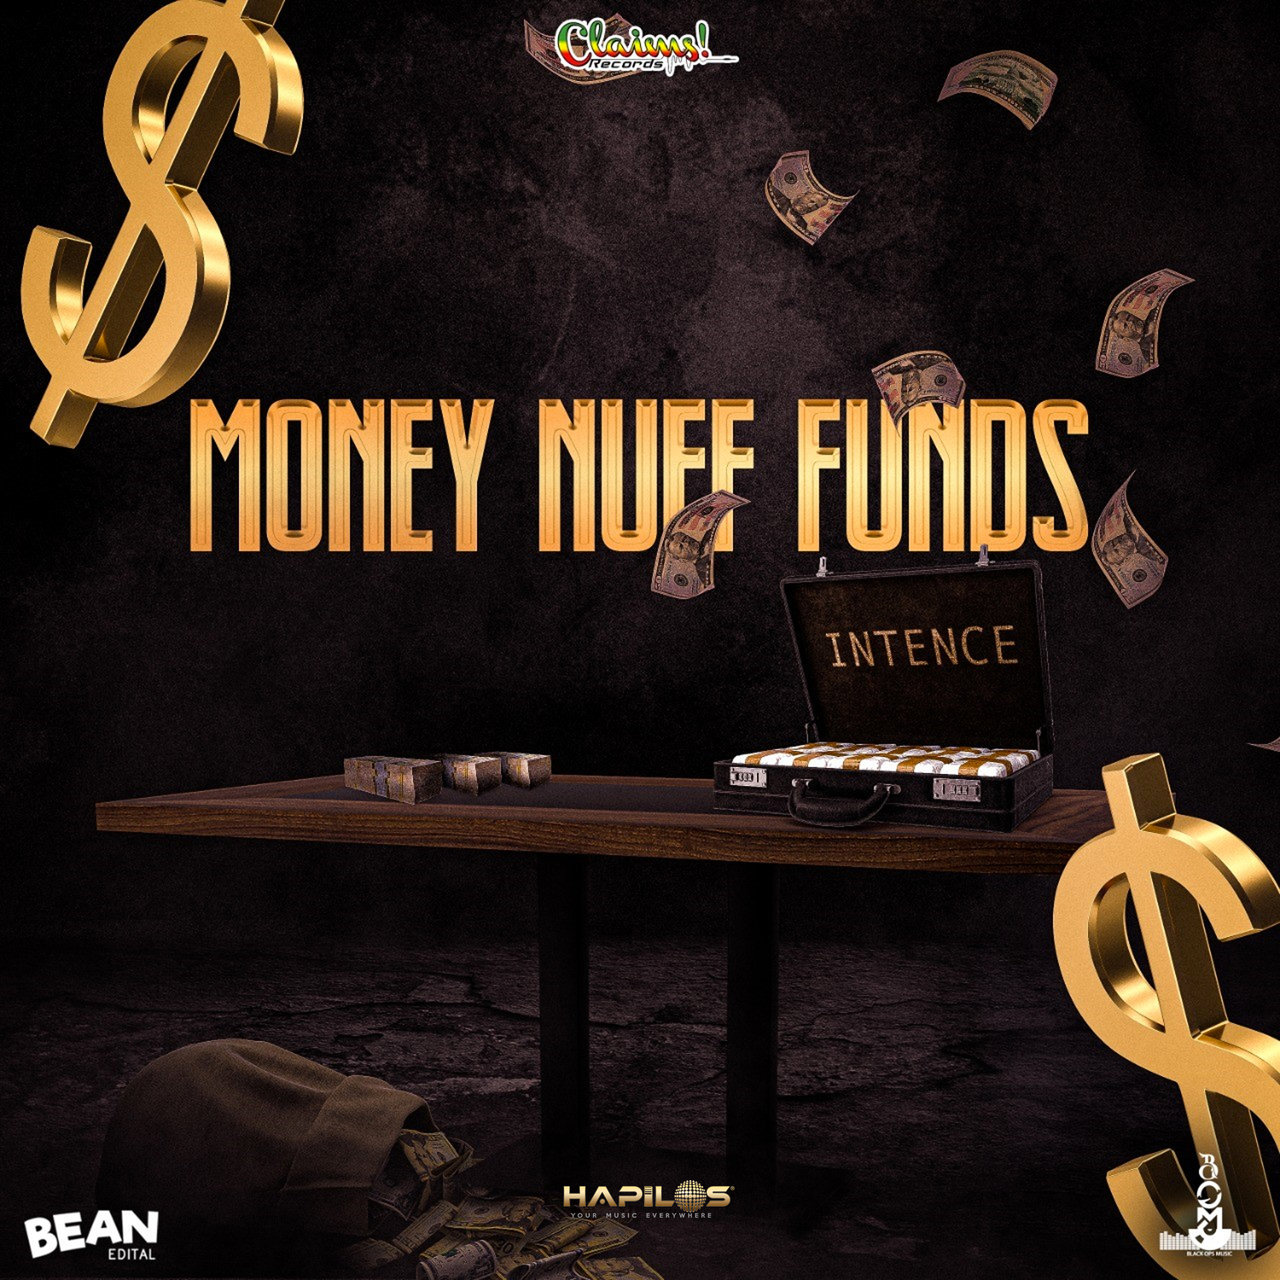 Intence - Money Nuff Funds (Cover)